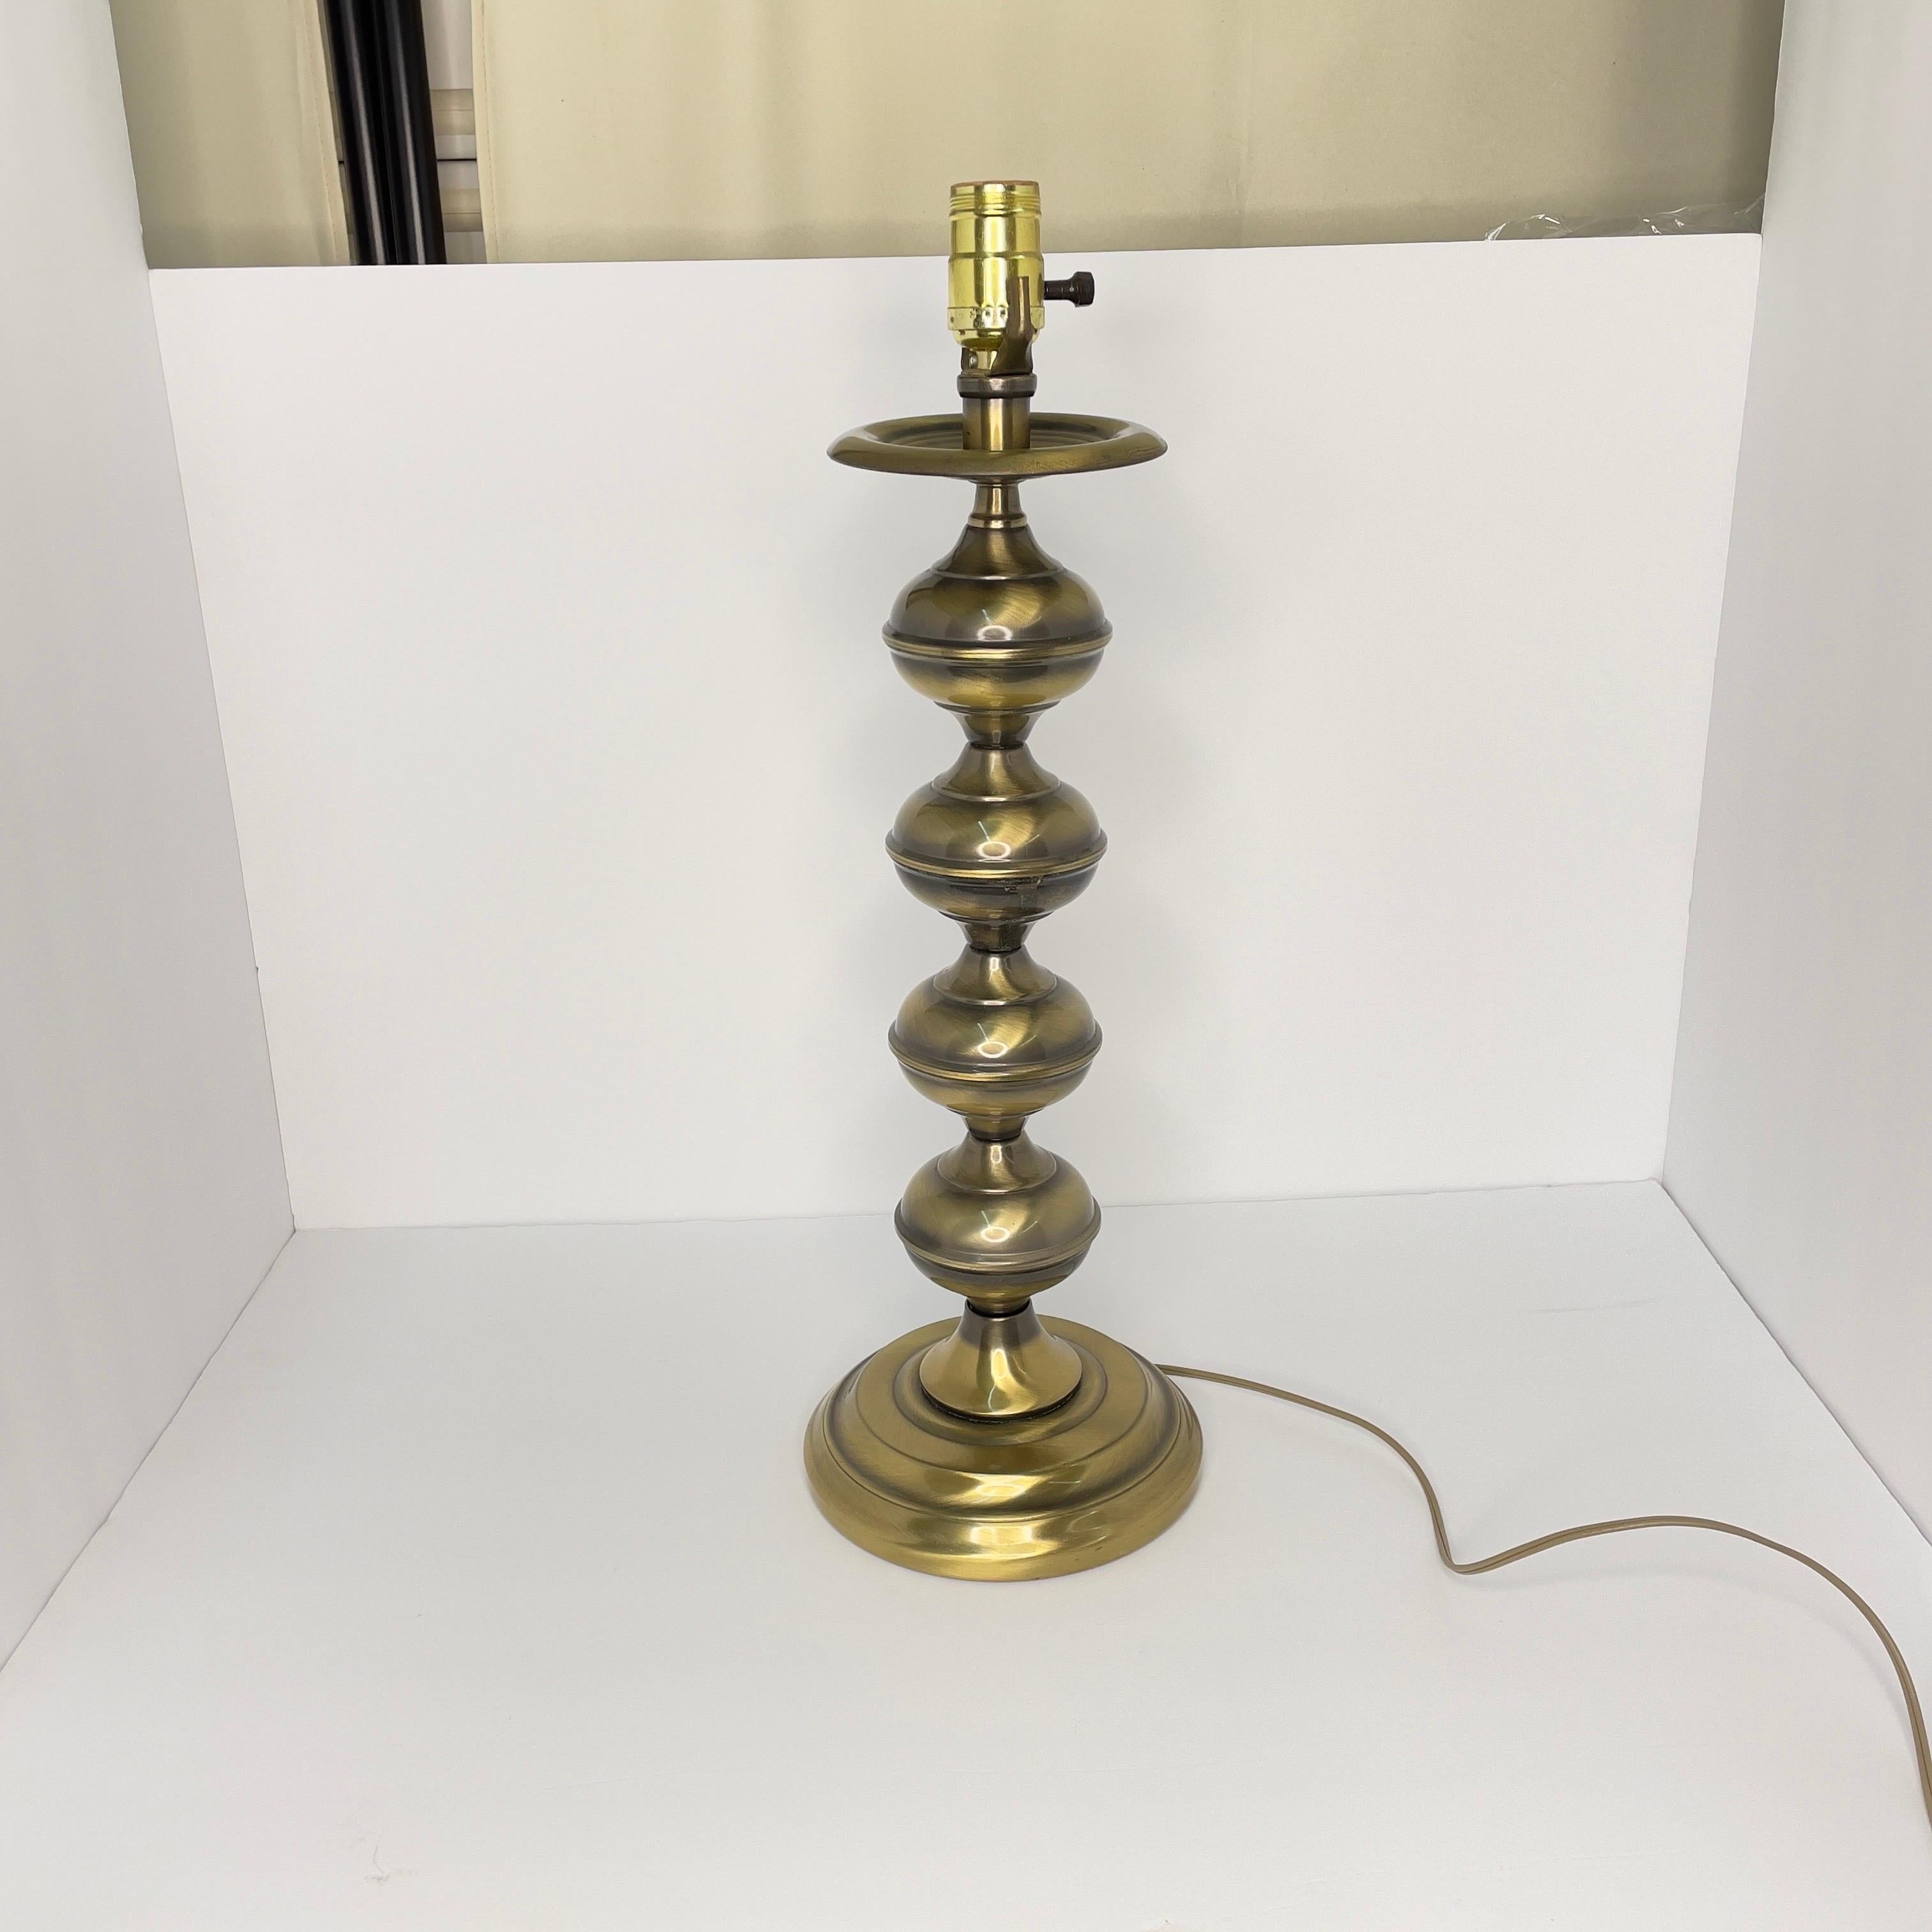 Possibly by Stiffel but, it’s unmarked. Lamp is in great shape. I didn’t notice any dents and no discoloration. It’s in overall very good condition and includes a lamp shade.

Height given is with the shade.  Shade is 14 inches wide at base.